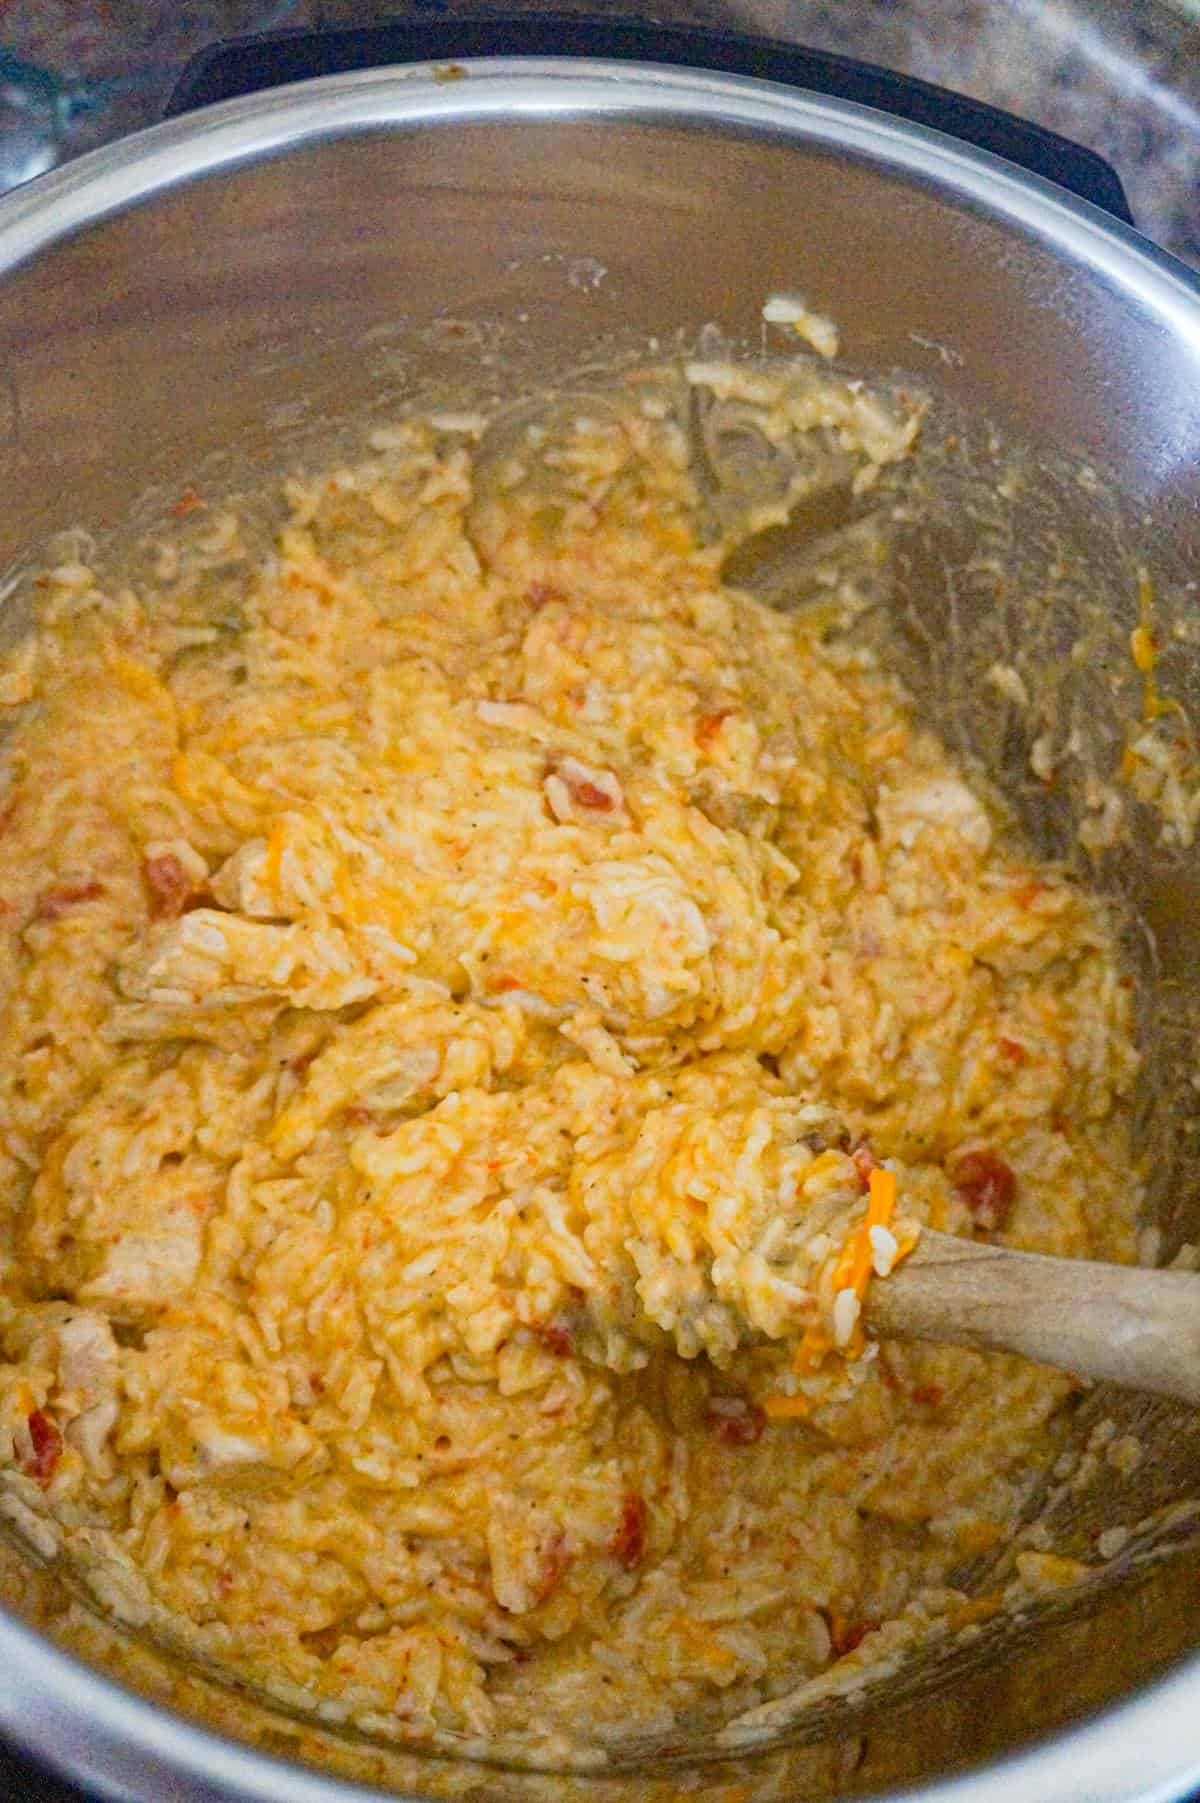 Instant Pot Cheesy Chicken and Rice is an easy pressure cooker dinner recipe made with long grain white rice and loaded with chunks of boneless, skinless chicken breasts and shredded cheese.